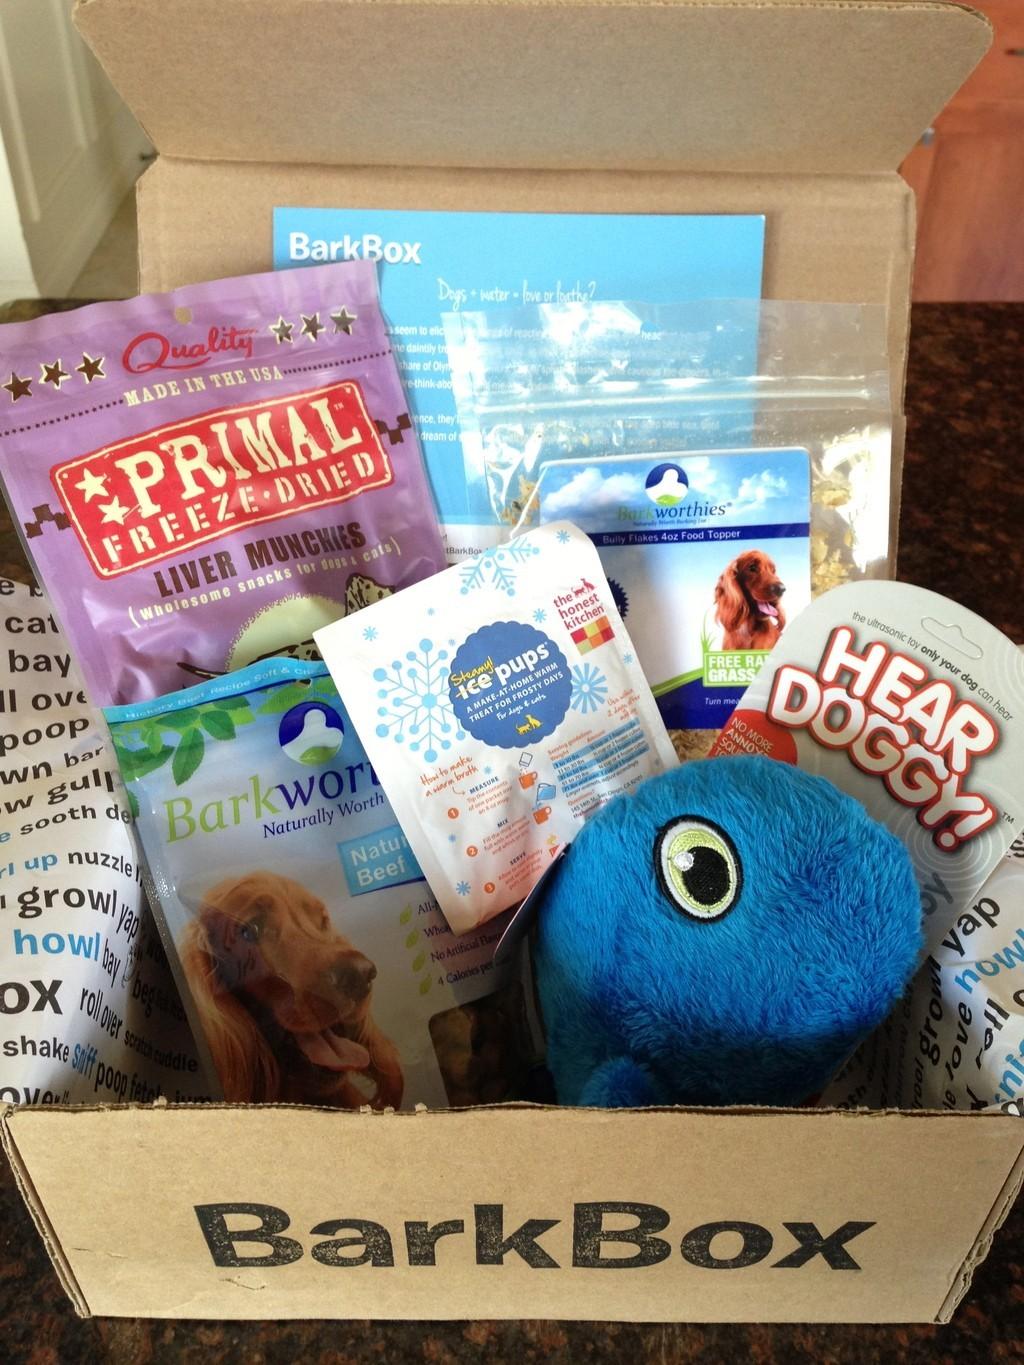 Barkbox Review + Coupon Code – August 2013